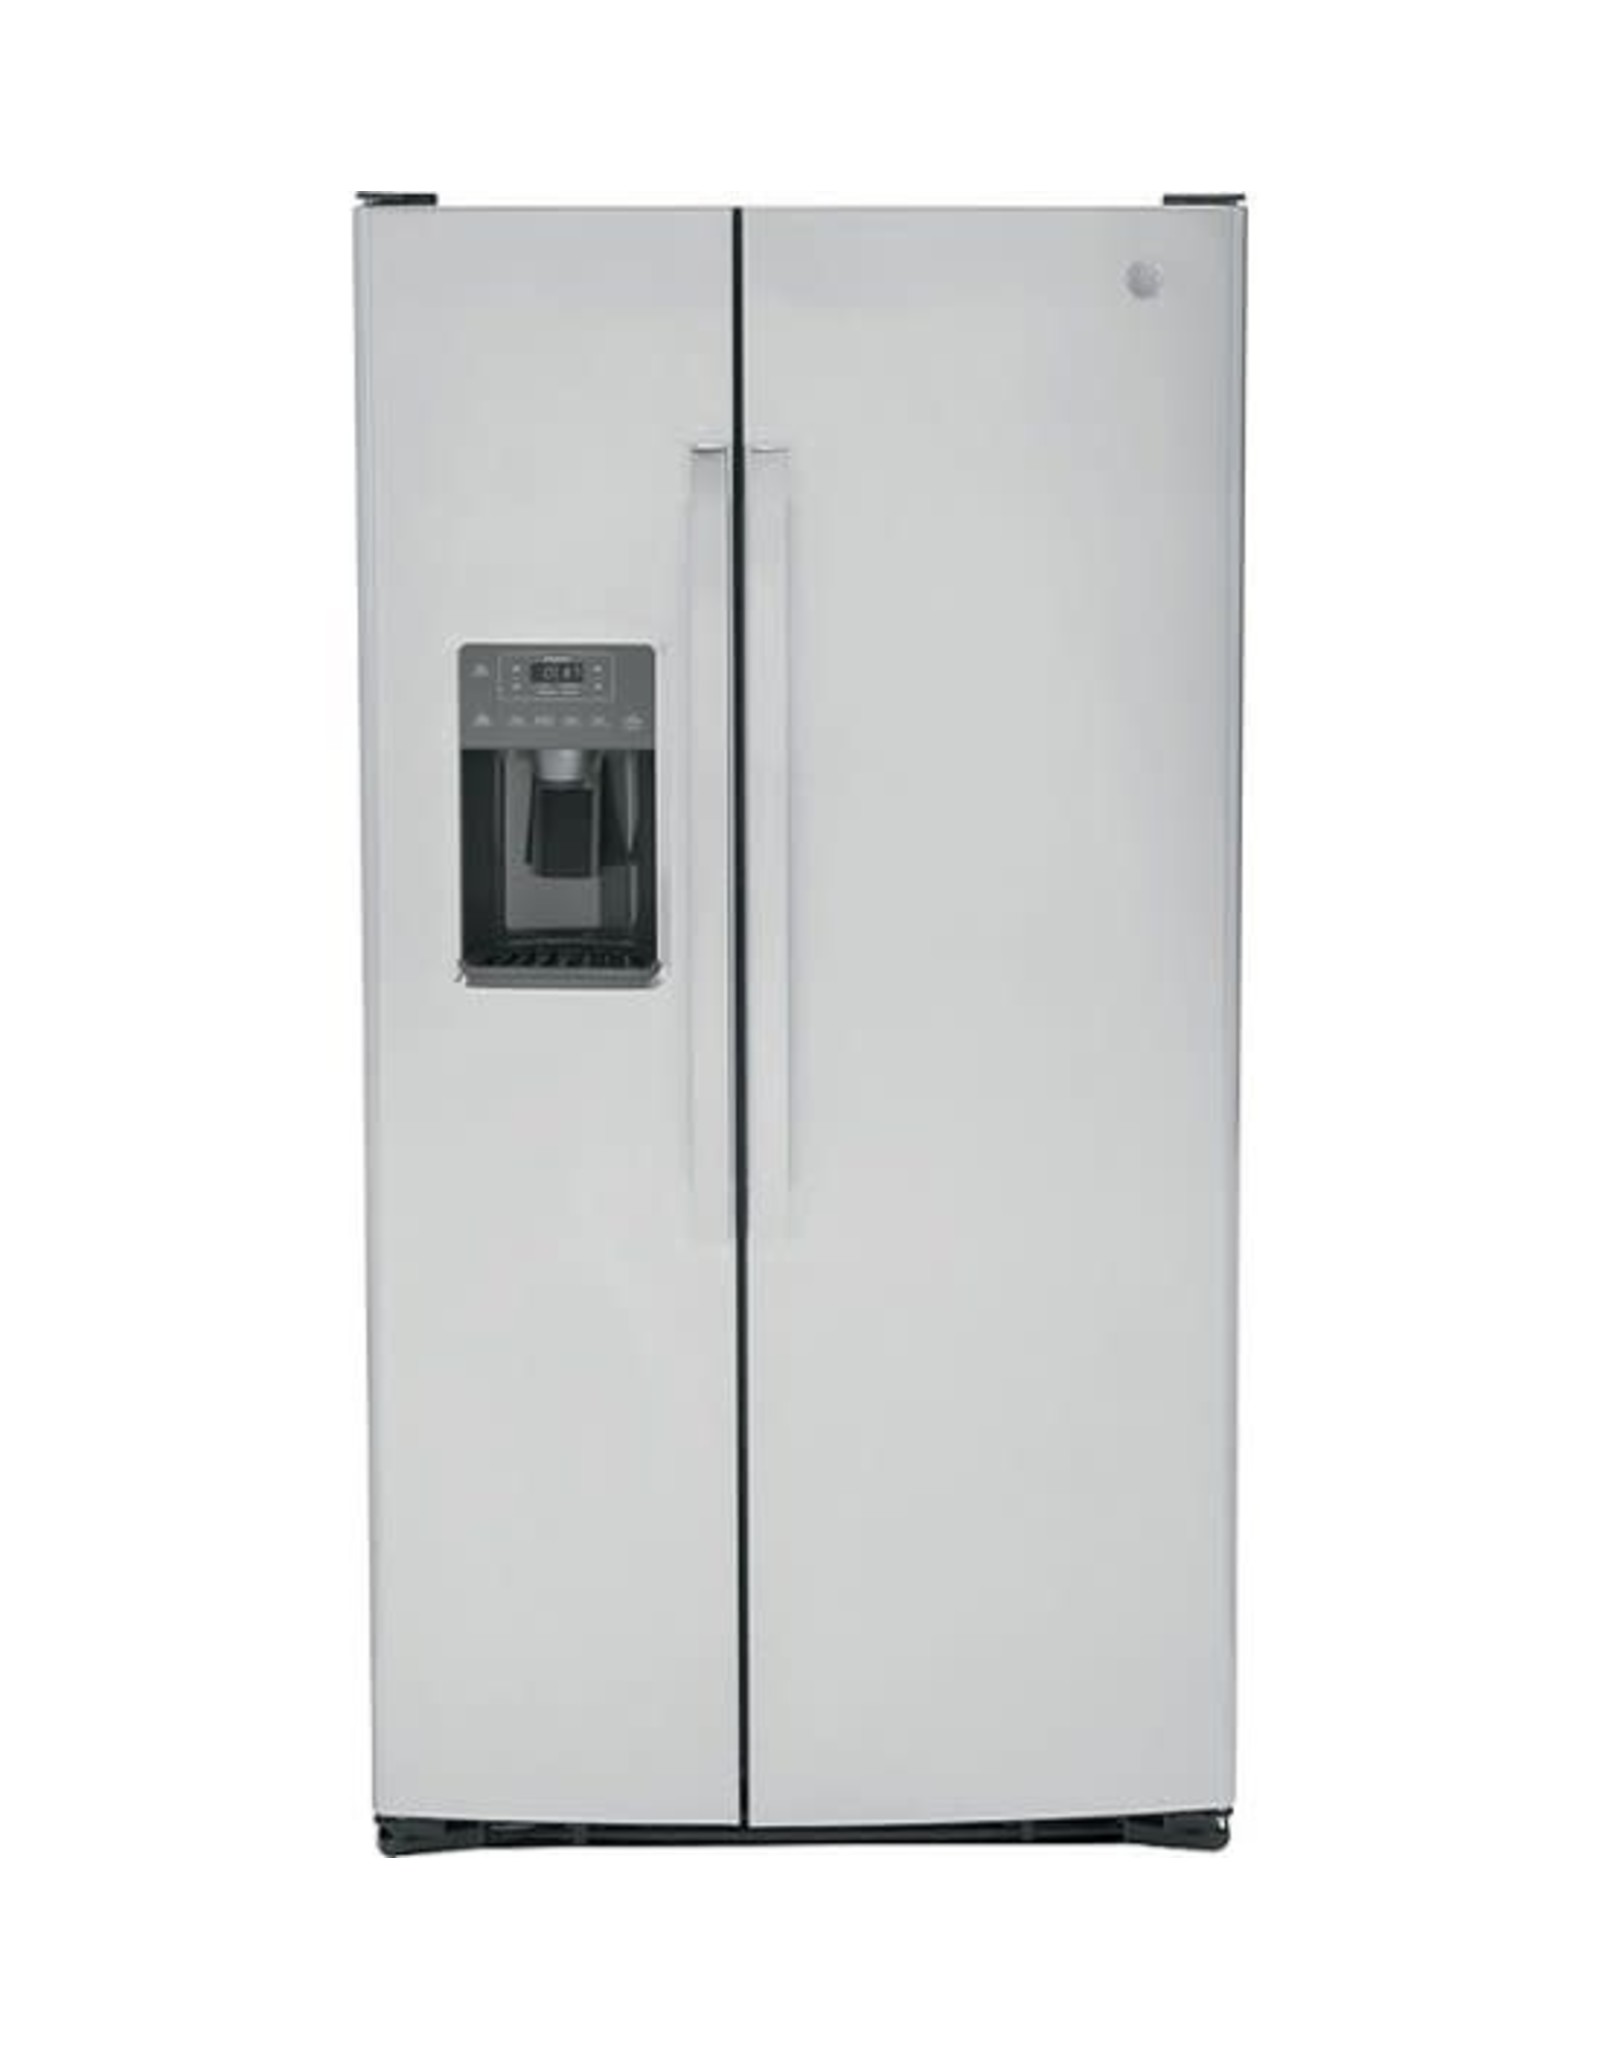 GE GSS25GYPFS GE - 25.3 Cu. Ft. Side-by-Side Refrigerator with External Ice & Water Dispenser - Stainless steel